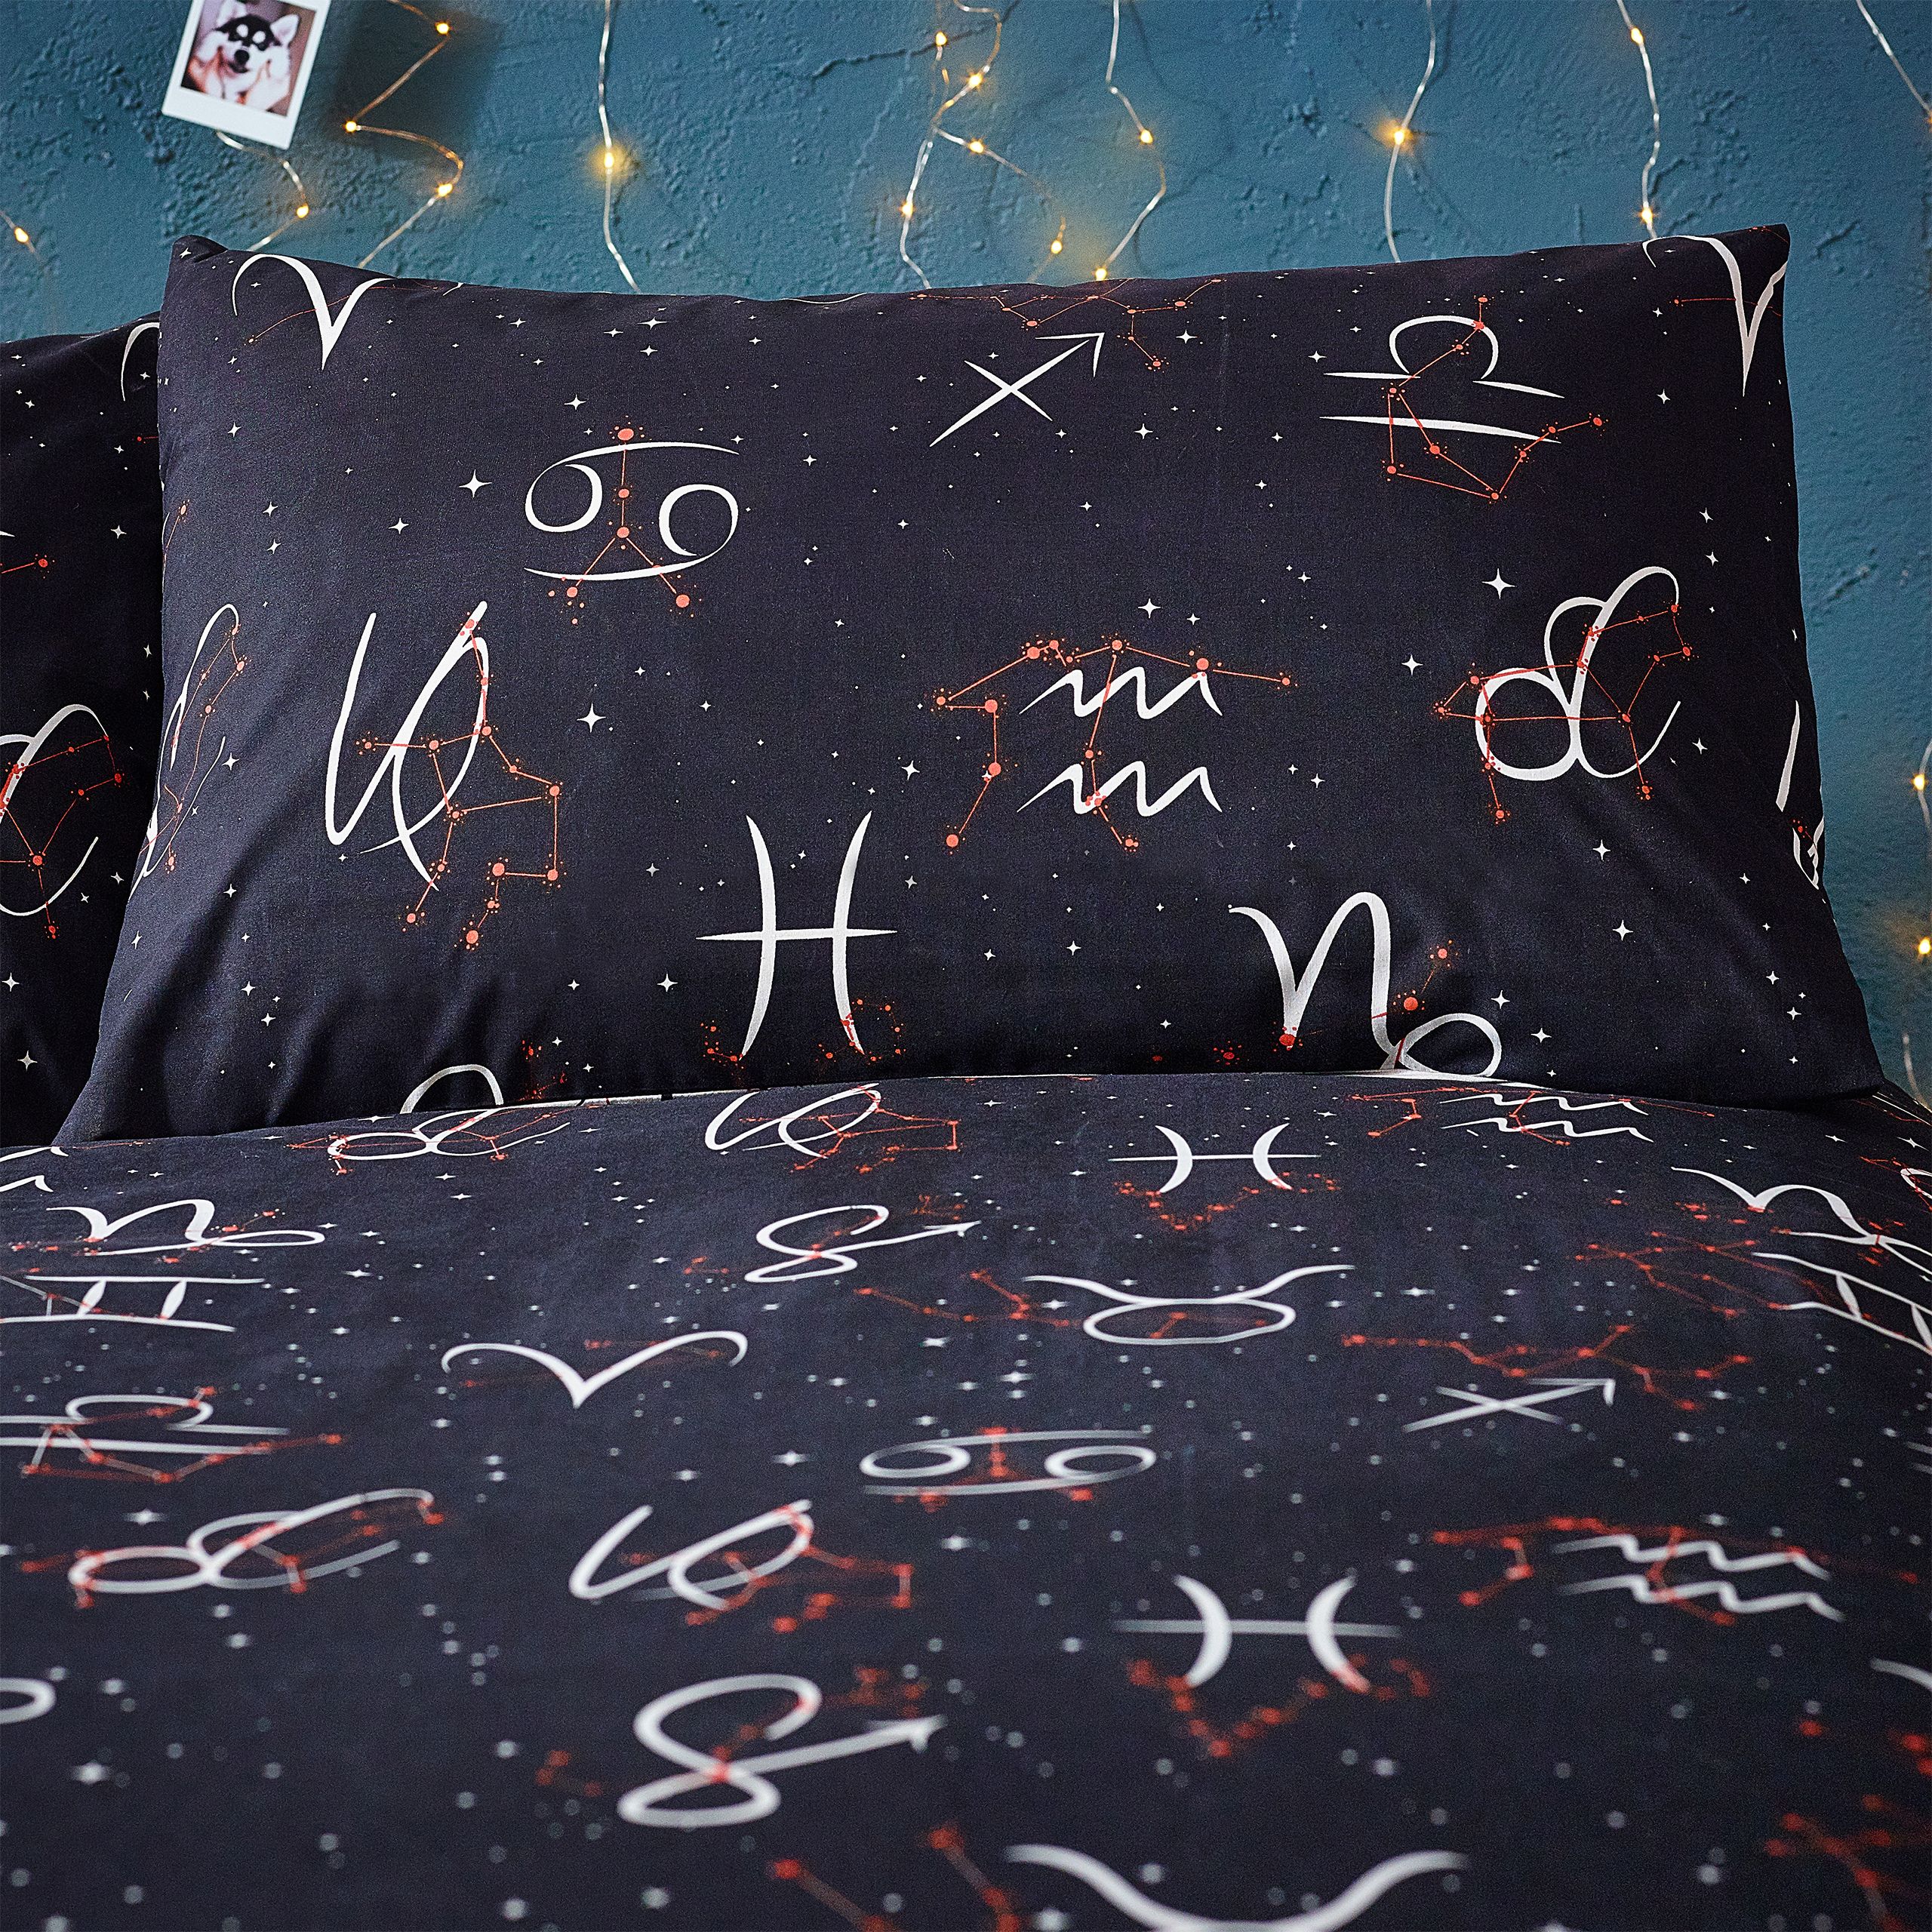 What is your zodiac sign? This zodiac inspired duvet set featuring all the zodiac signs surrounded by star constellations. The design continues to the reverse on a neutral base so you can switch the look when you need to. Have the best night’s sleep with this celestial-themed duvet set.